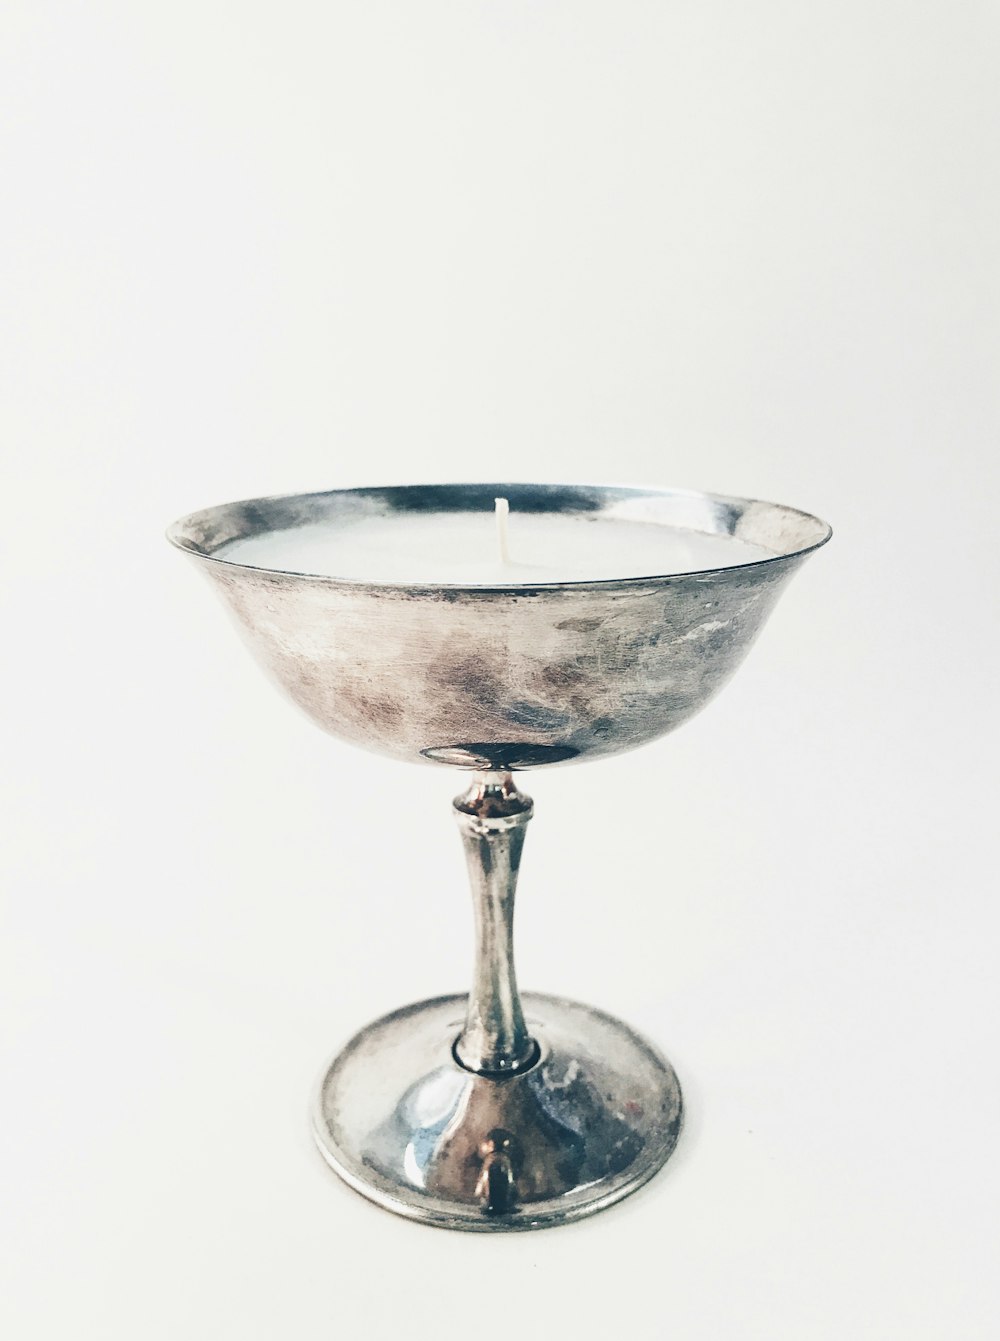 stainless steel candle holder with white candle